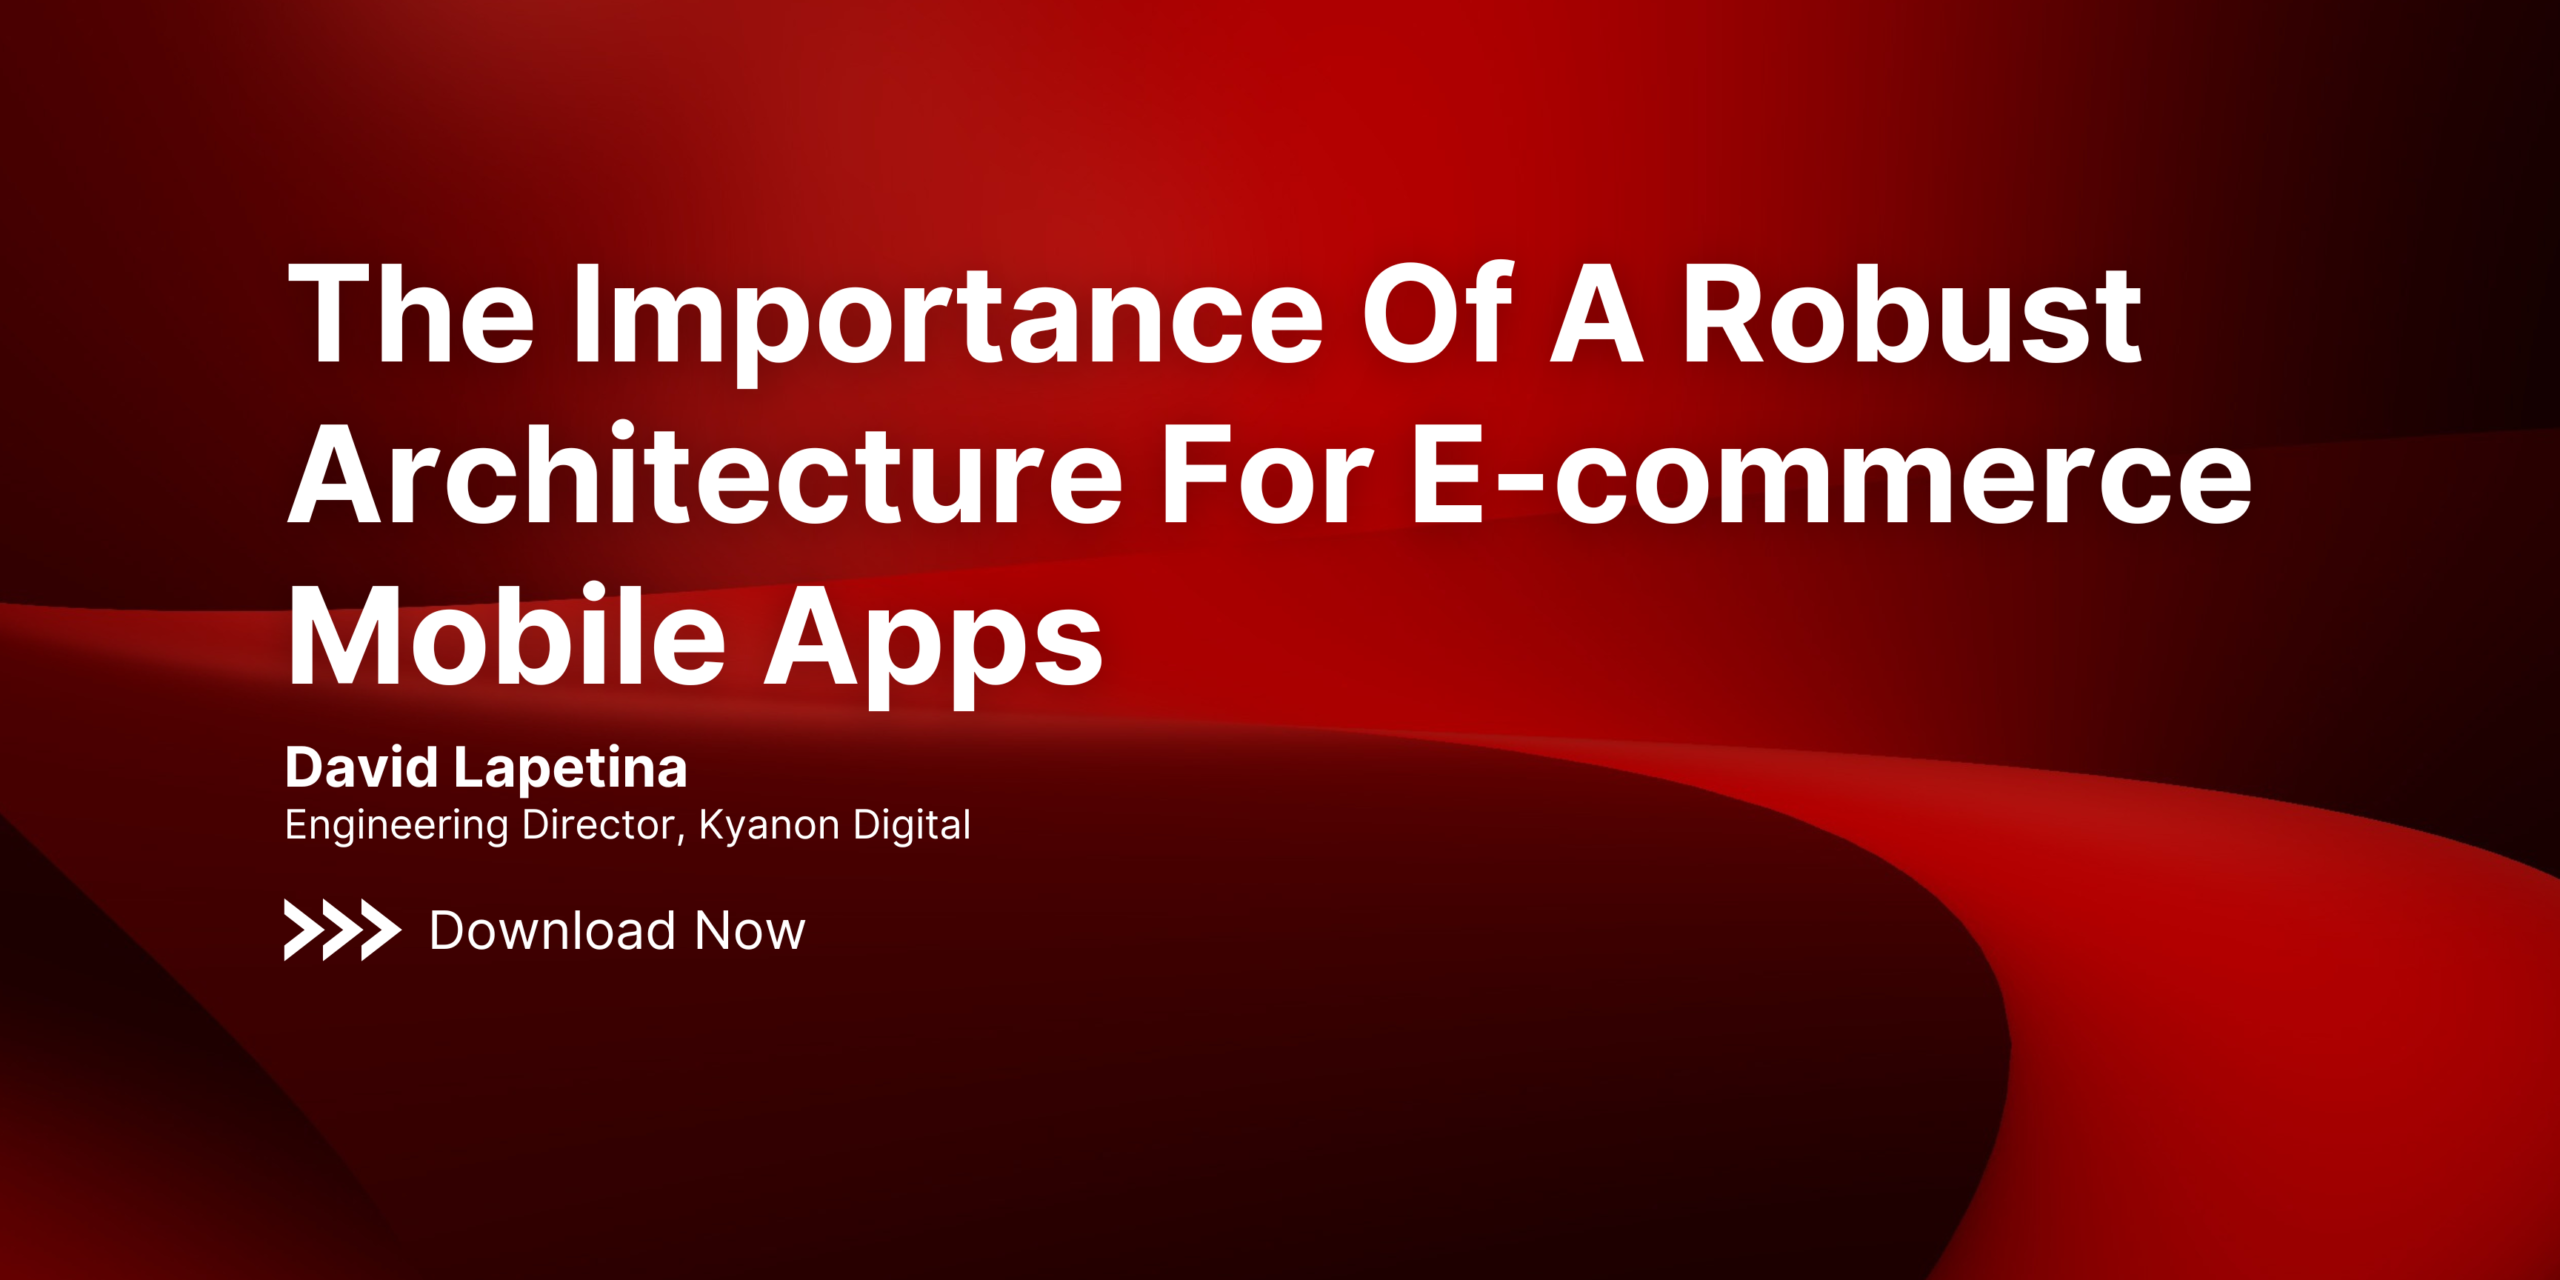 The Importance Of A Robust Architecture For E-commerce Mobile Apps